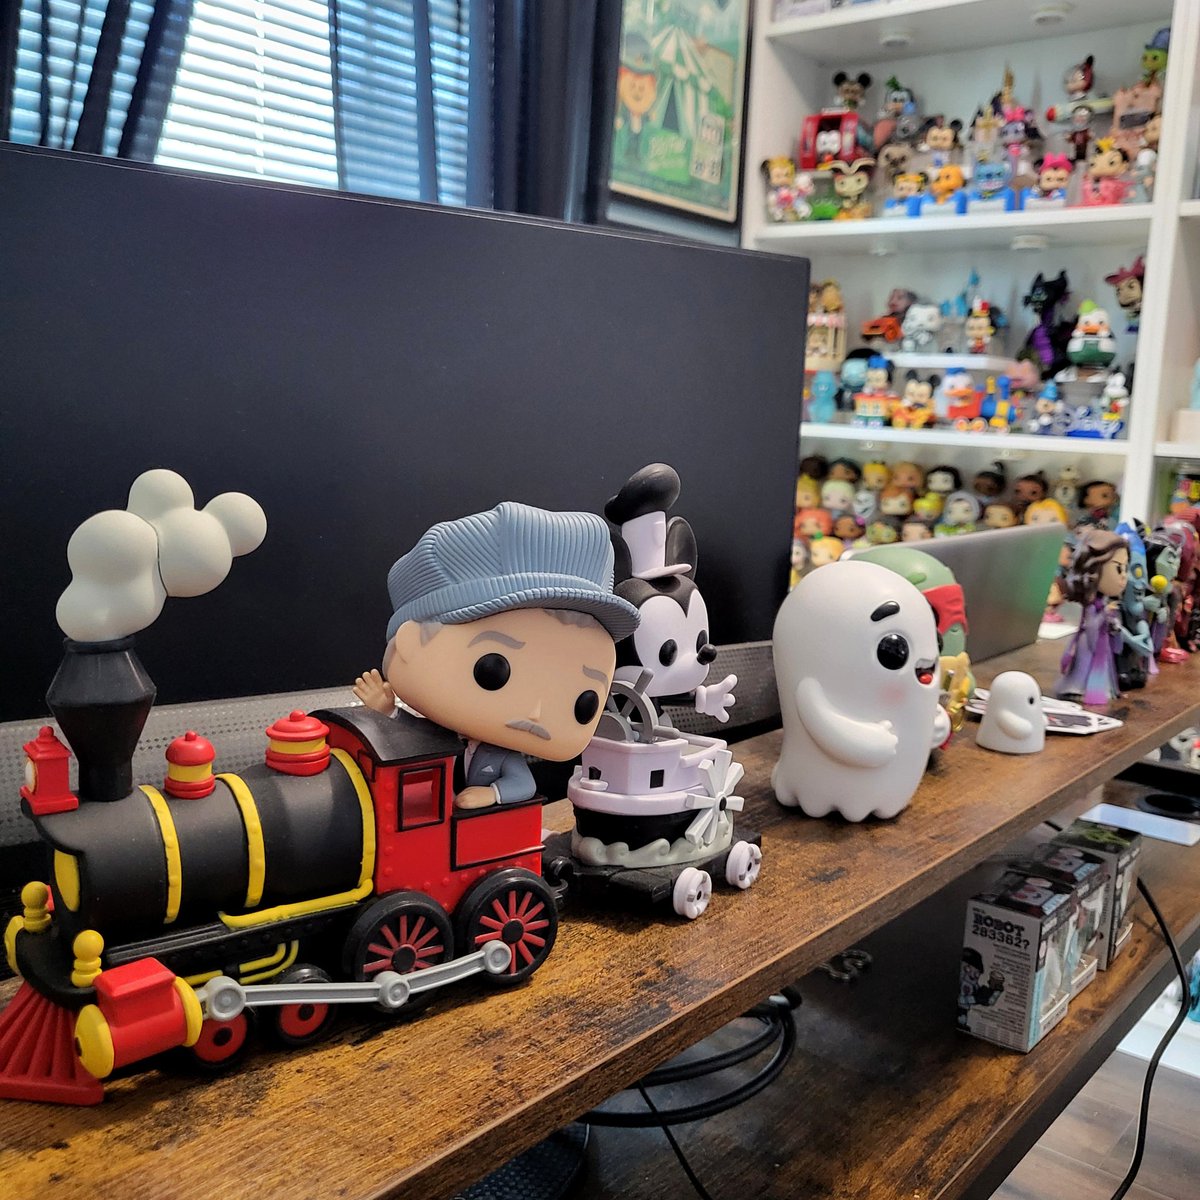 Didn't have to be in the office today, so here's another view from my home office for Office Day! @FunkoLeeM @dj3cb #FunkoPhotoADayChallenge #FunkoFeb2024